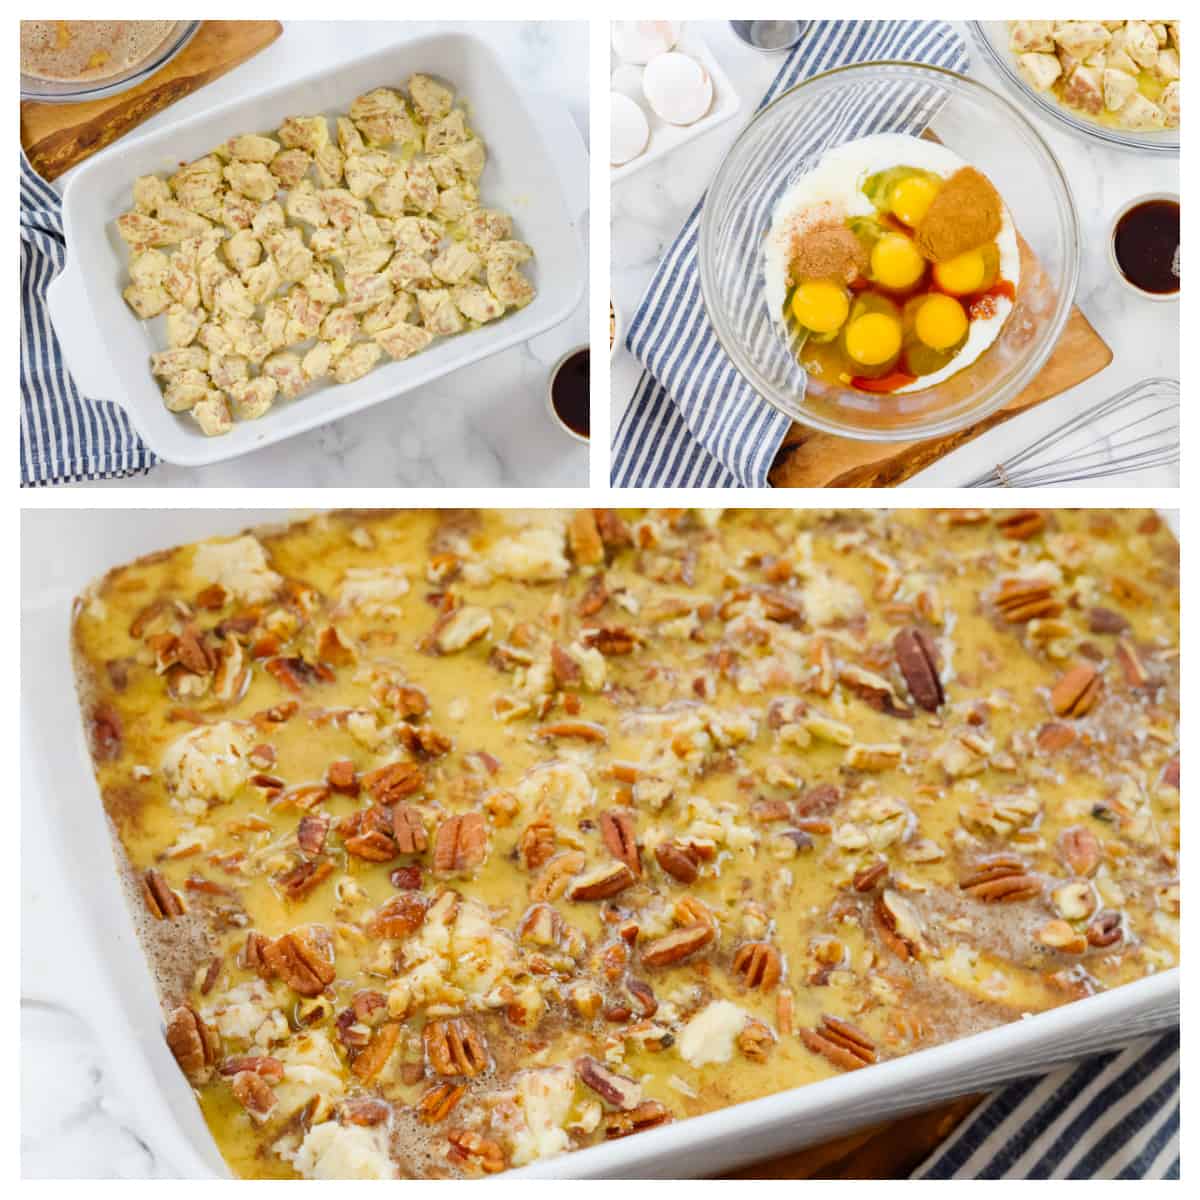 Collage showing how to make cinnamon roll French toast casserole.